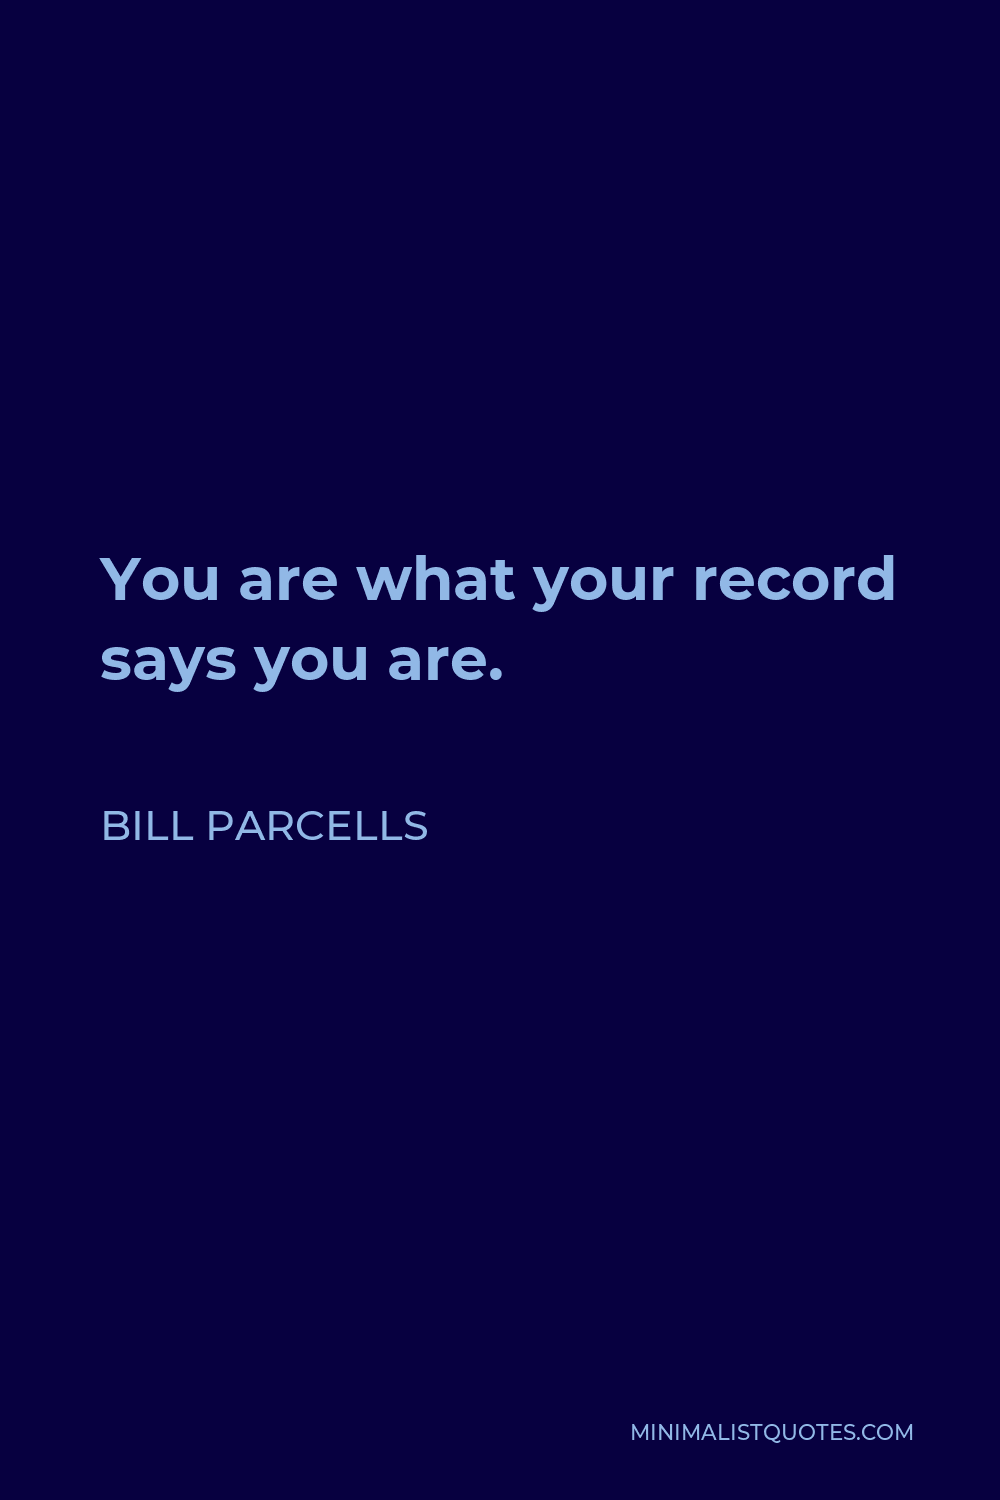 Bill Parcells Quote - You are what your record says you are.